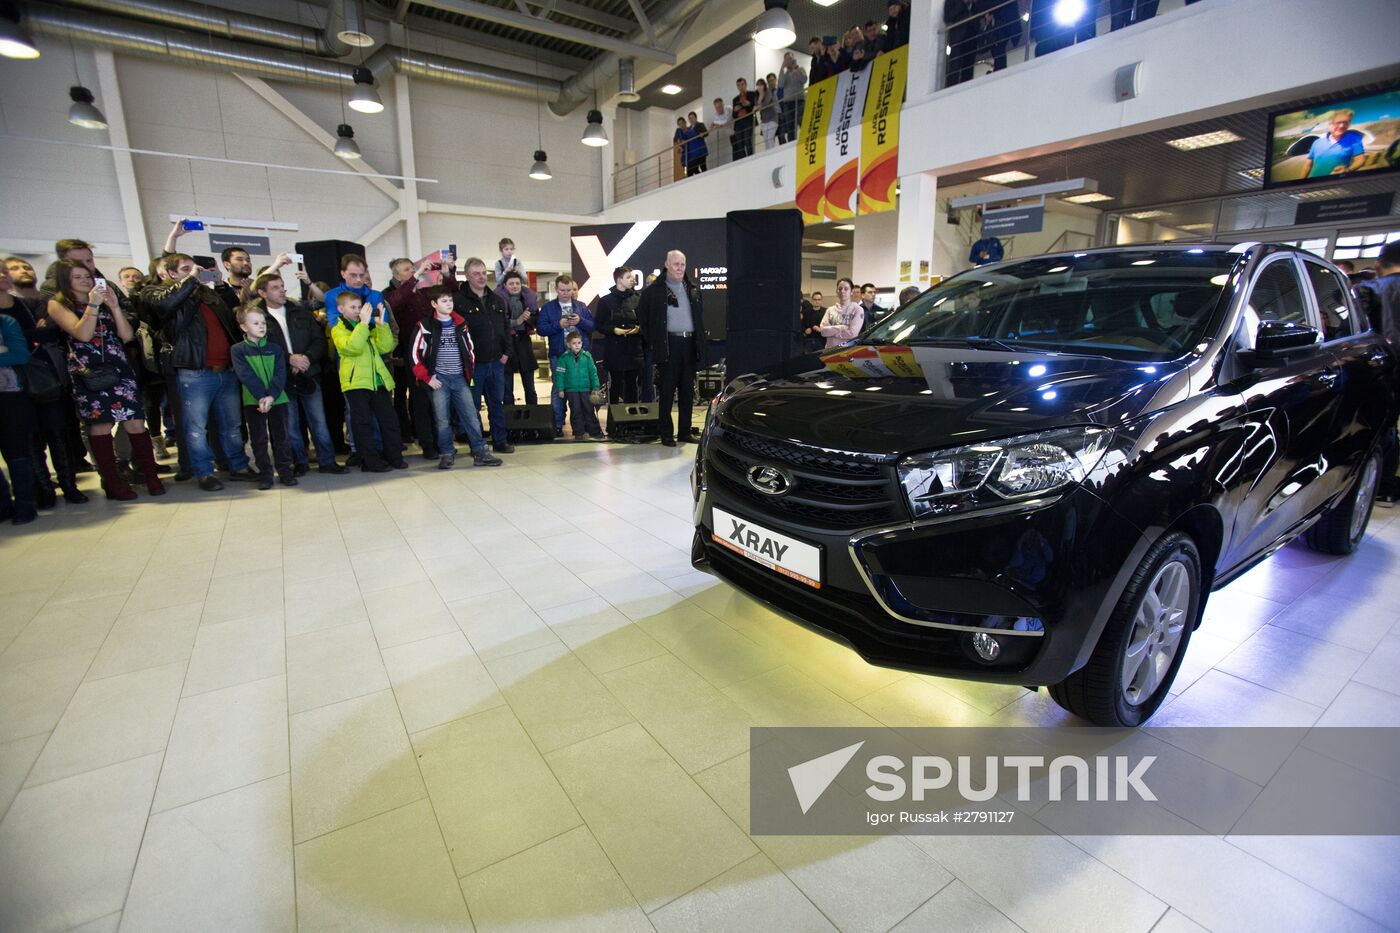 Sales of Lada Xray compact crossover start in Russia